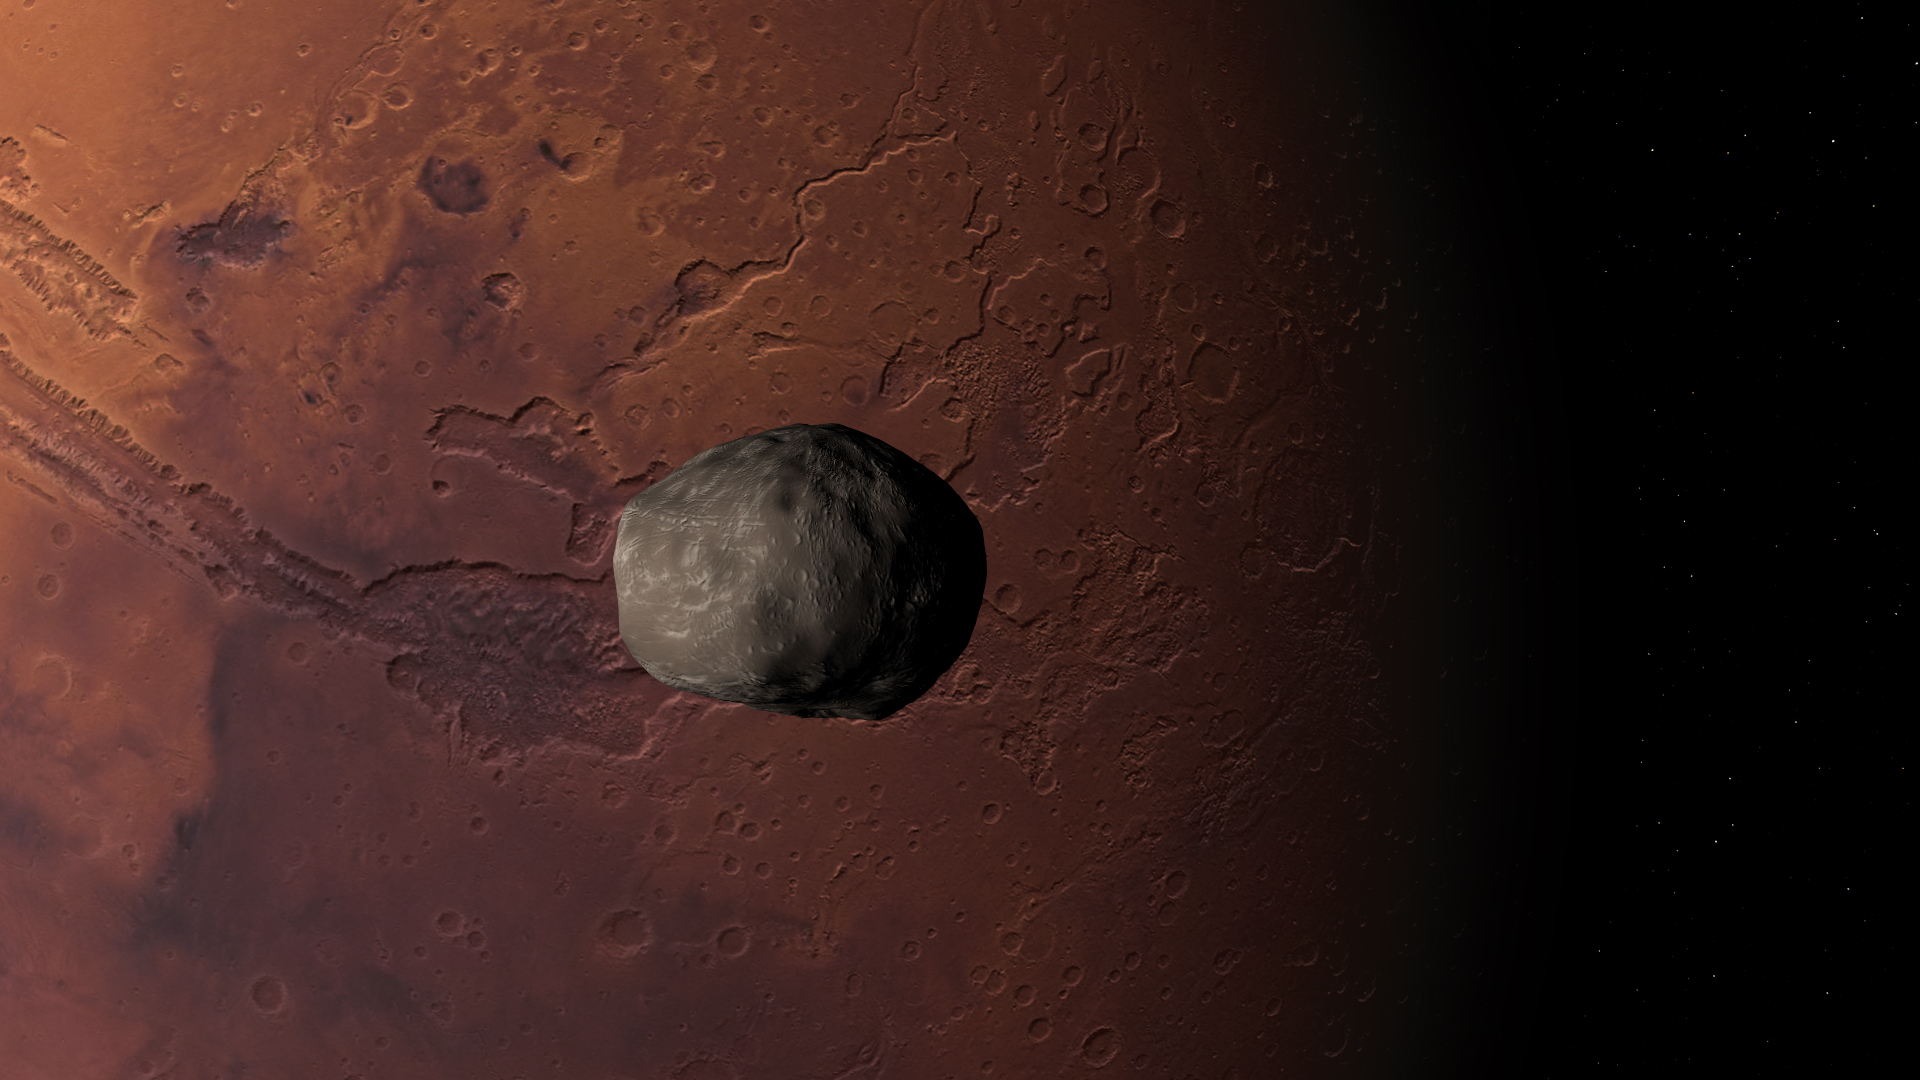 Phobos in the background of Mars